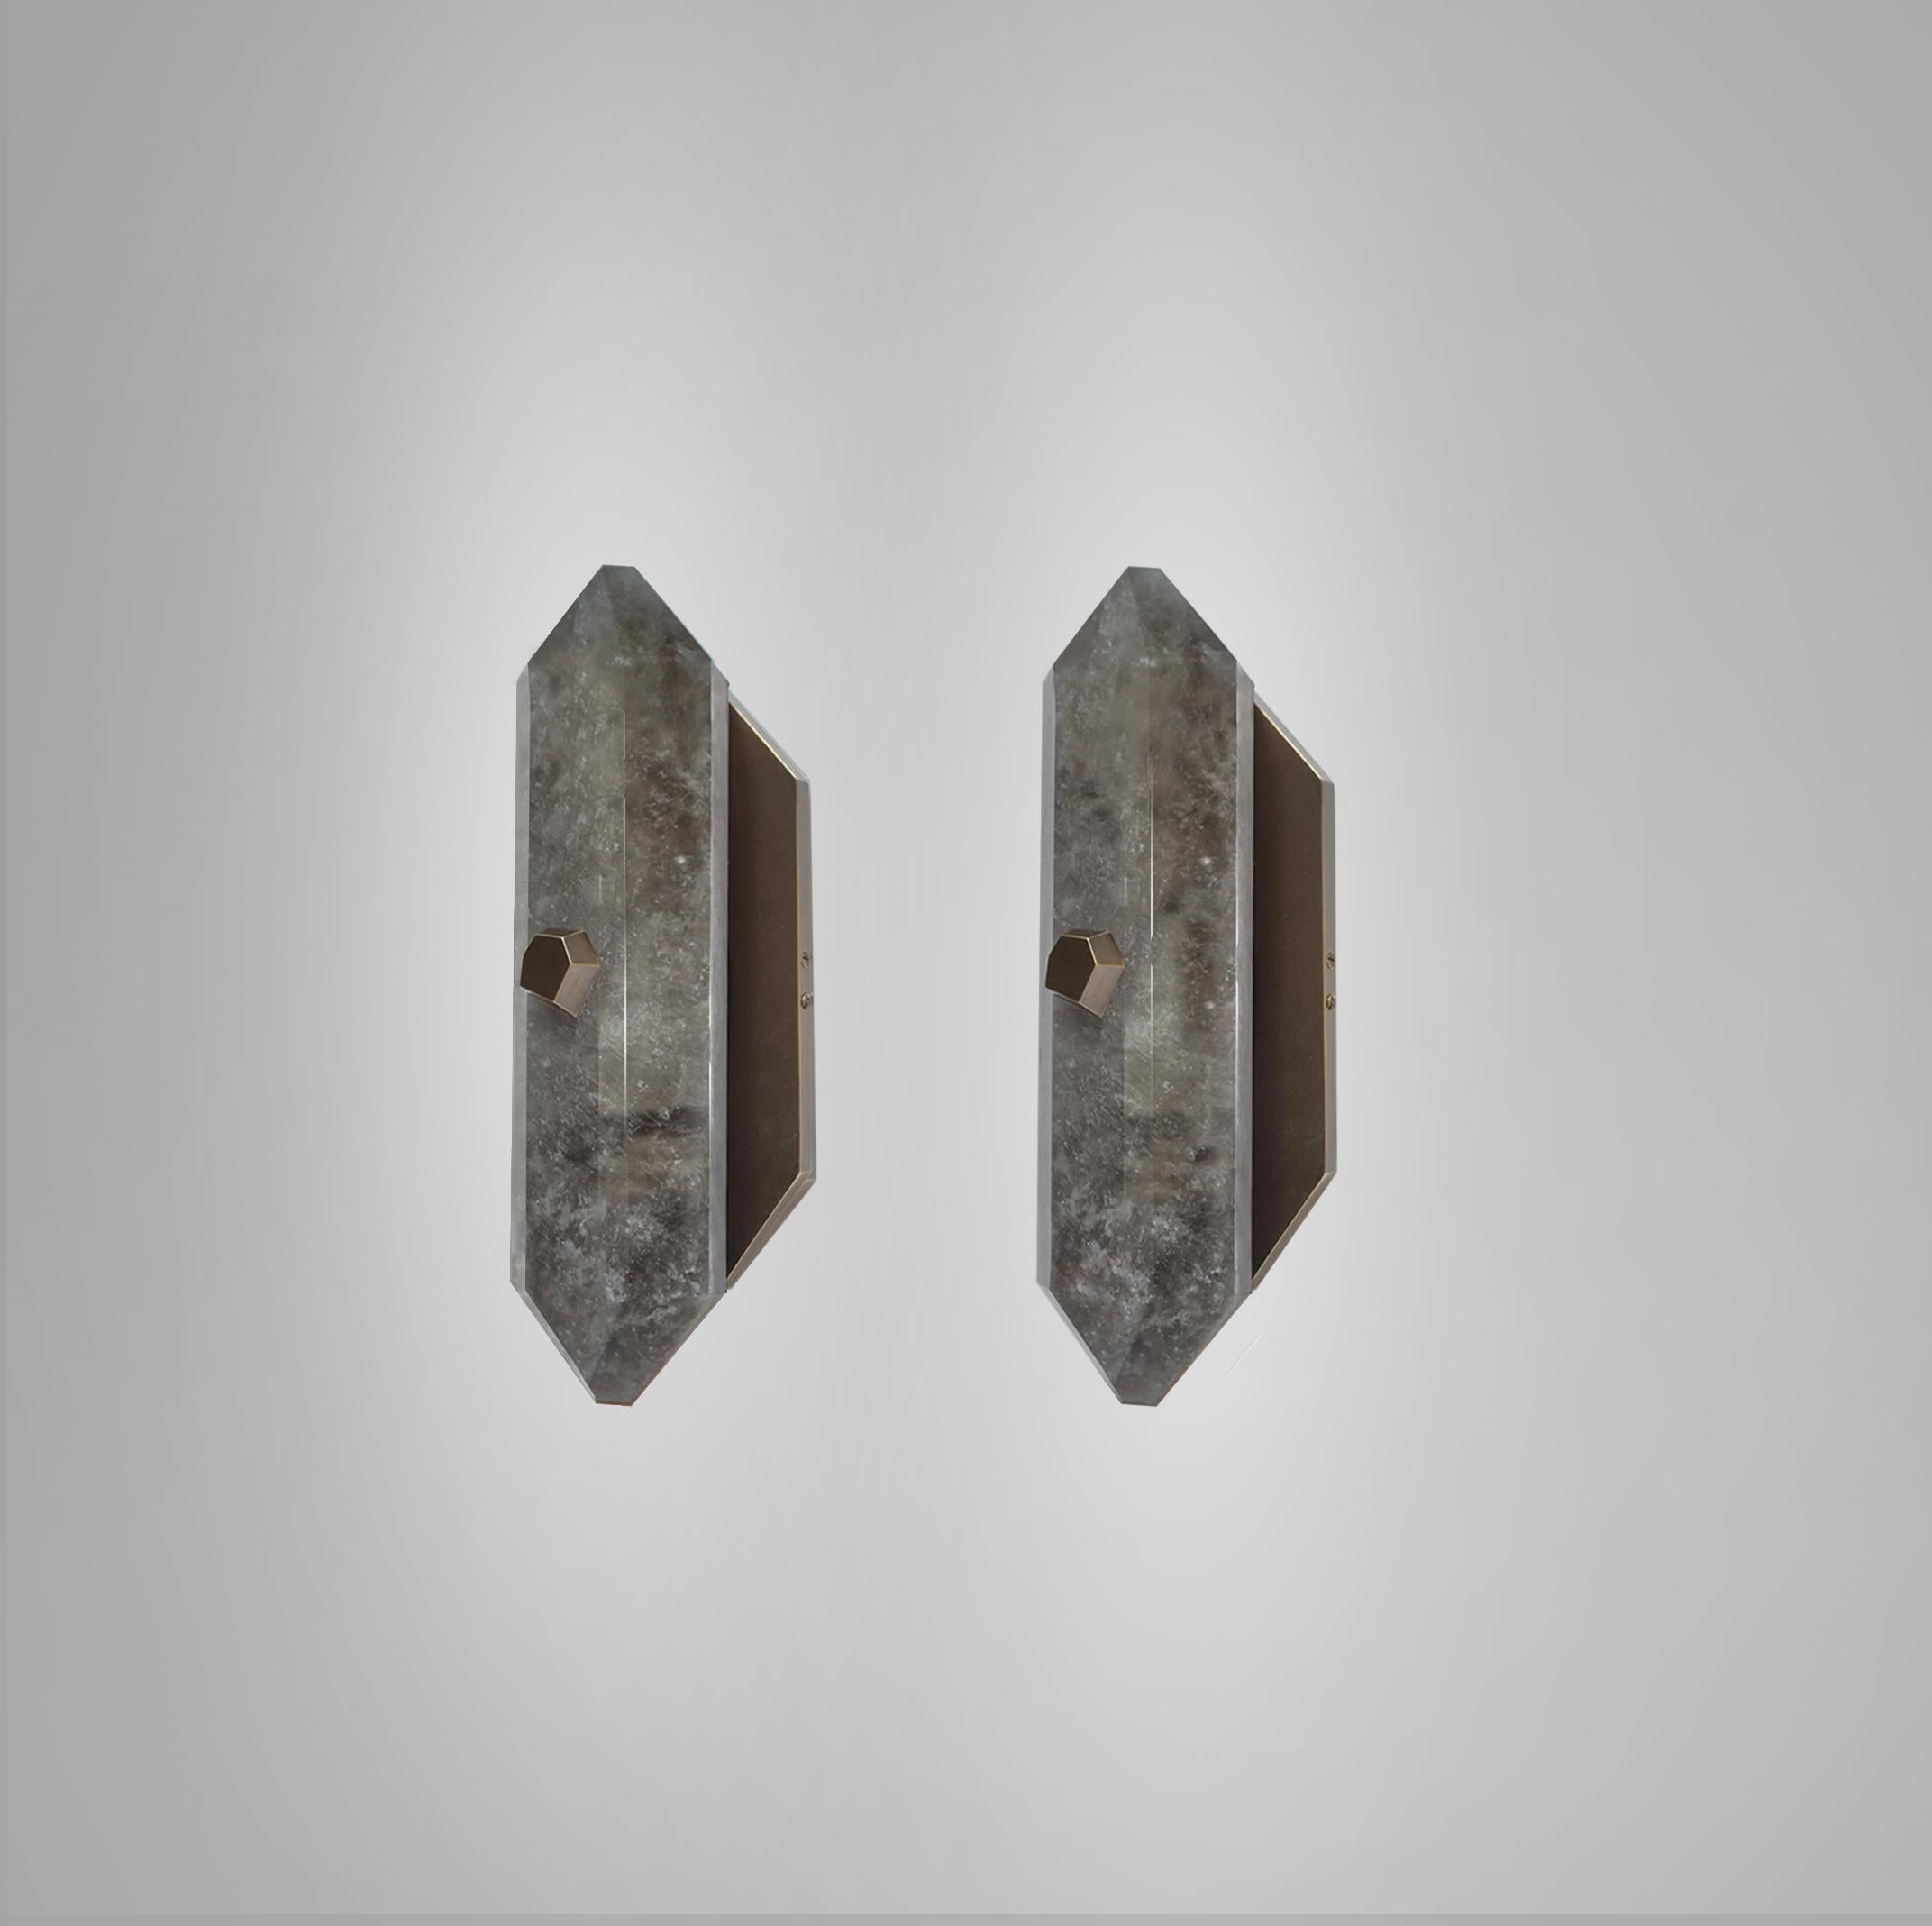 Pair of finely carved diamond form smoky rock crystal quartz wall sconces with diamond form antique brass finish bolts. Created by Phoenix Gallery.
Custom measurement, finish, and quantity upon request. 
Each sconce installed two sockets. 60 watts